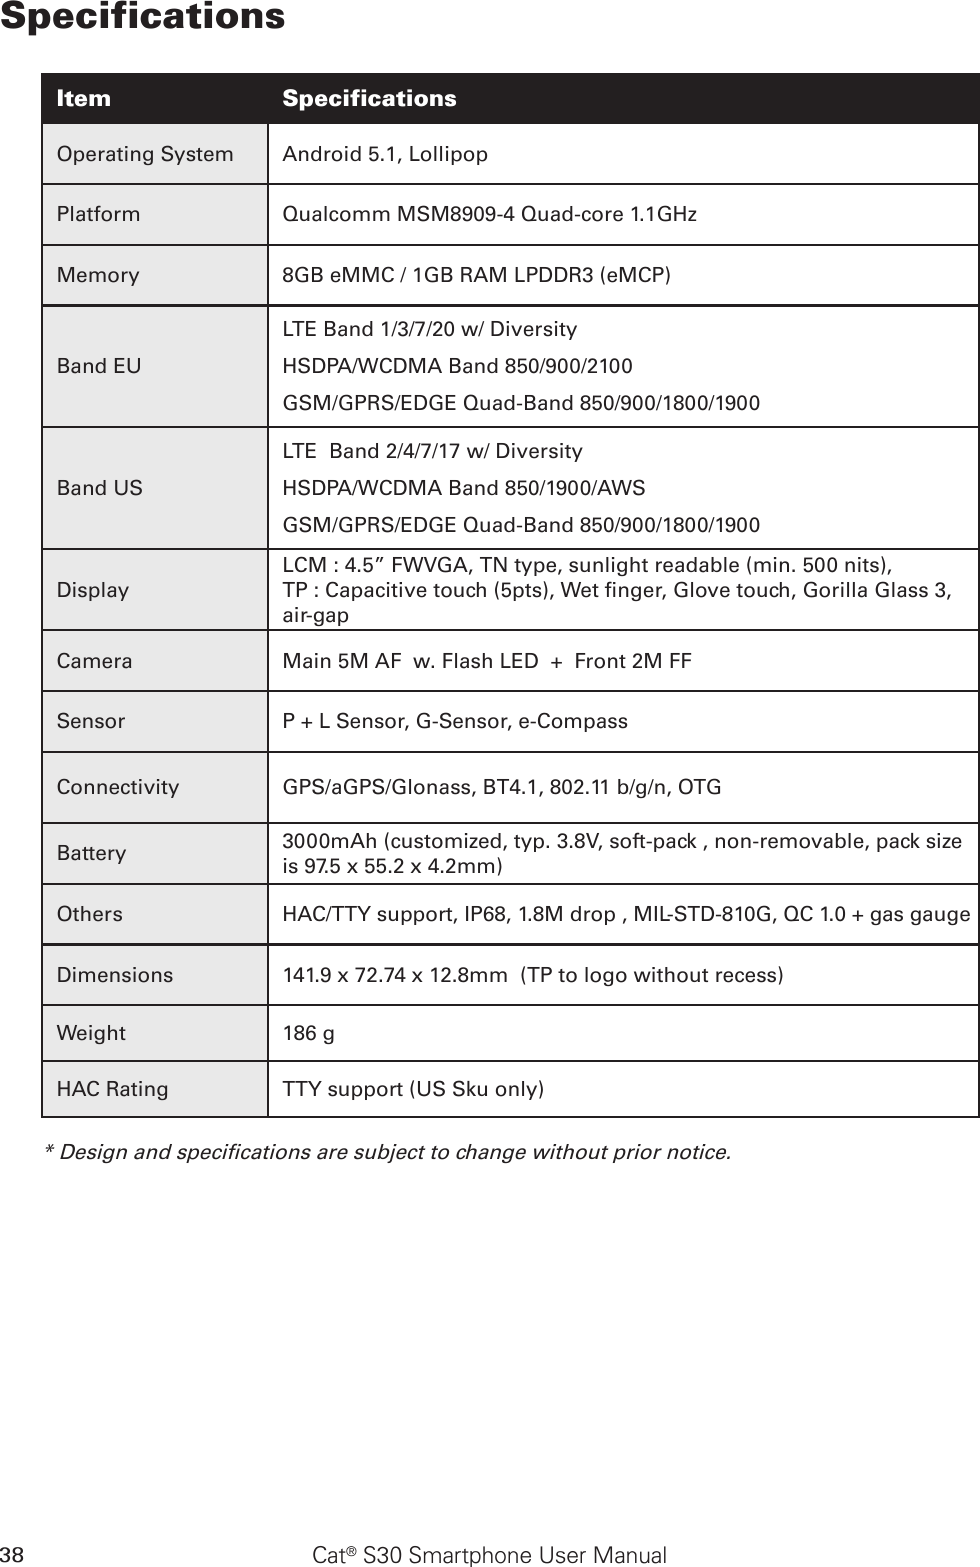 Cat® S30 Smartphone User Manual38SpecificationsItem SpecificationsOperating System Android 5.1, LollipopPlatform Qualcomm MSM8909-4 Quad-core 1.1GHzMemory 8GB eMMC / 1GB RAM LPDDR3 (eMCP)Band EULTE Band 1/3/7/20 w/ DiversityHSDPA/WCDMA Band 850/900/2100GSM/GPRS/EDGE Quad-Band 850/900/1800/1900Band USLTE  Band 2/4/7/17 w/ DiversityHSDPA/WCDMA Band 850/1900/AWS GSM/GPRS/EDGE Quad-Band 850/900/1800/1900DisplayLCM : 4.5” FWVGA, TN type, sunlight readable (min. 500 nits),TP : Capacitive touch (5pts), Wet nger, Glove touch, Gorilla Glass 3, air-gapCamera Main 5M AF  w. Flash LED  +  Front 2M FFSensor P + L Sensor, G-Sensor, e-Compass Connectivity GPS/aGPS/Glonass, BT4.1, 802.11 b/g/n, OTGBattery 3000mAh (customized, typ. 3.8V, soft-pack , non-removable, pack size is 97.5 x 55.2 x 4.2mm)Others HAC/TTY support, IP68, 1.8M drop , MIL-STD-810G, QC 1.0 + gas gaugeDimensions 141.9 x 72.74 x 12.8mm  (TP to logo without recess)Weight 186 gHAC Rating TTY support (US Sku only) * Design and specications are subject to change without prior notice.